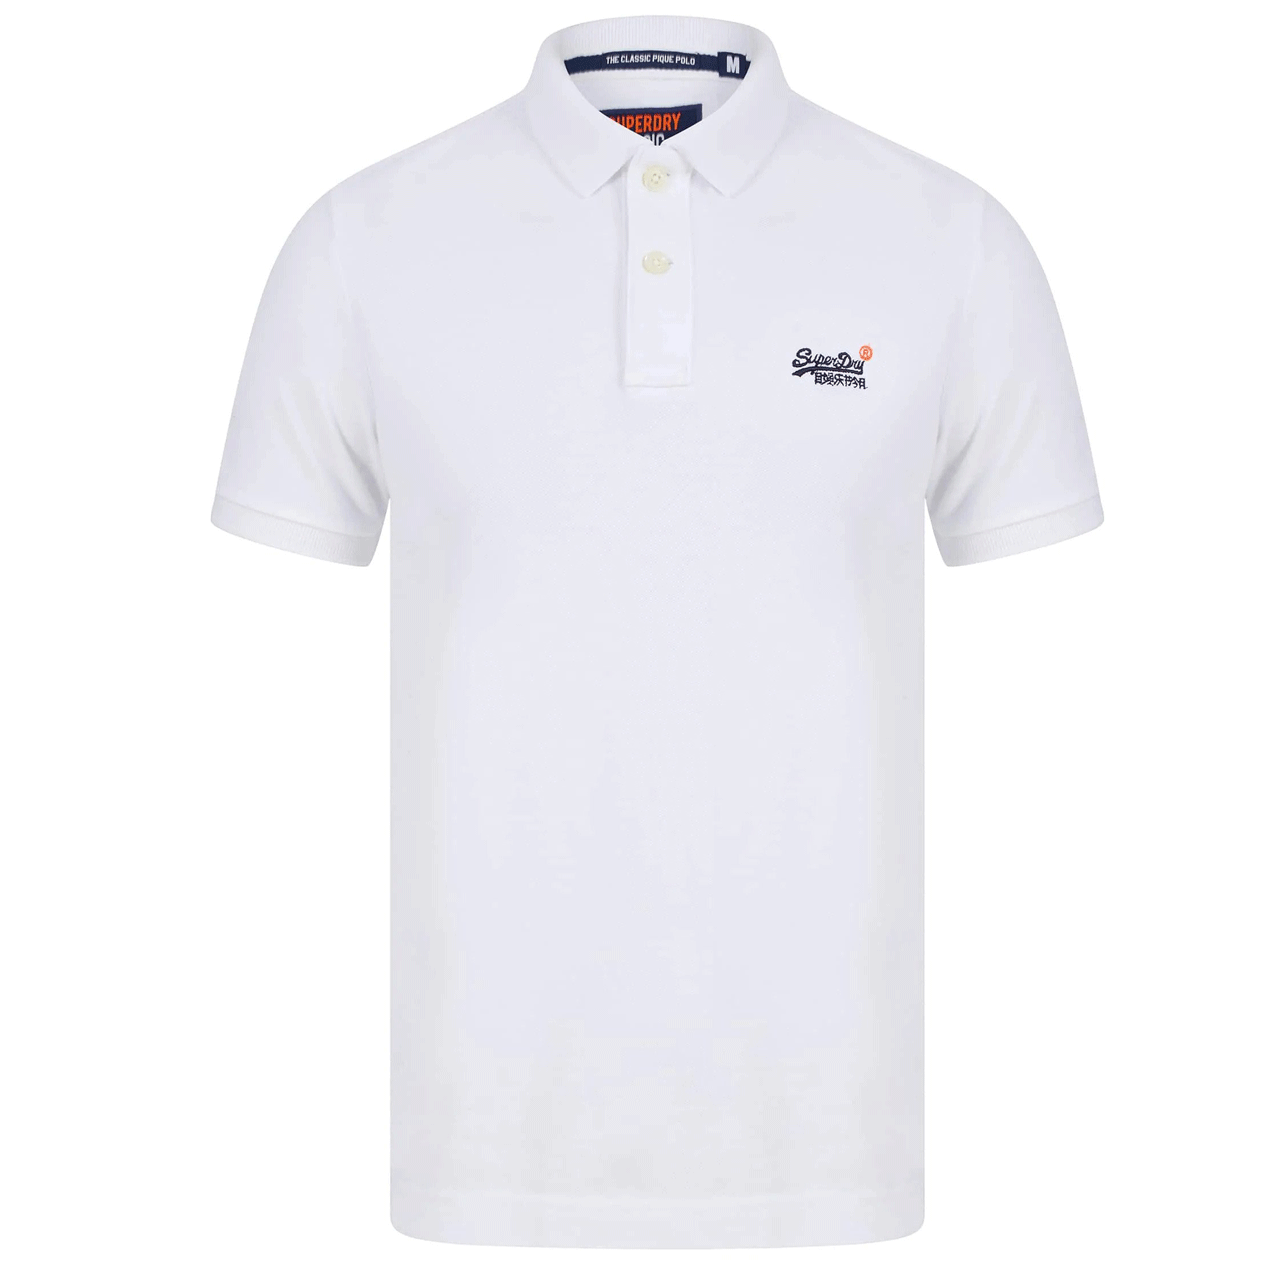 SUPERDRY CLASSIC PIQUE POLO TOP WHITE M1110031A-01C